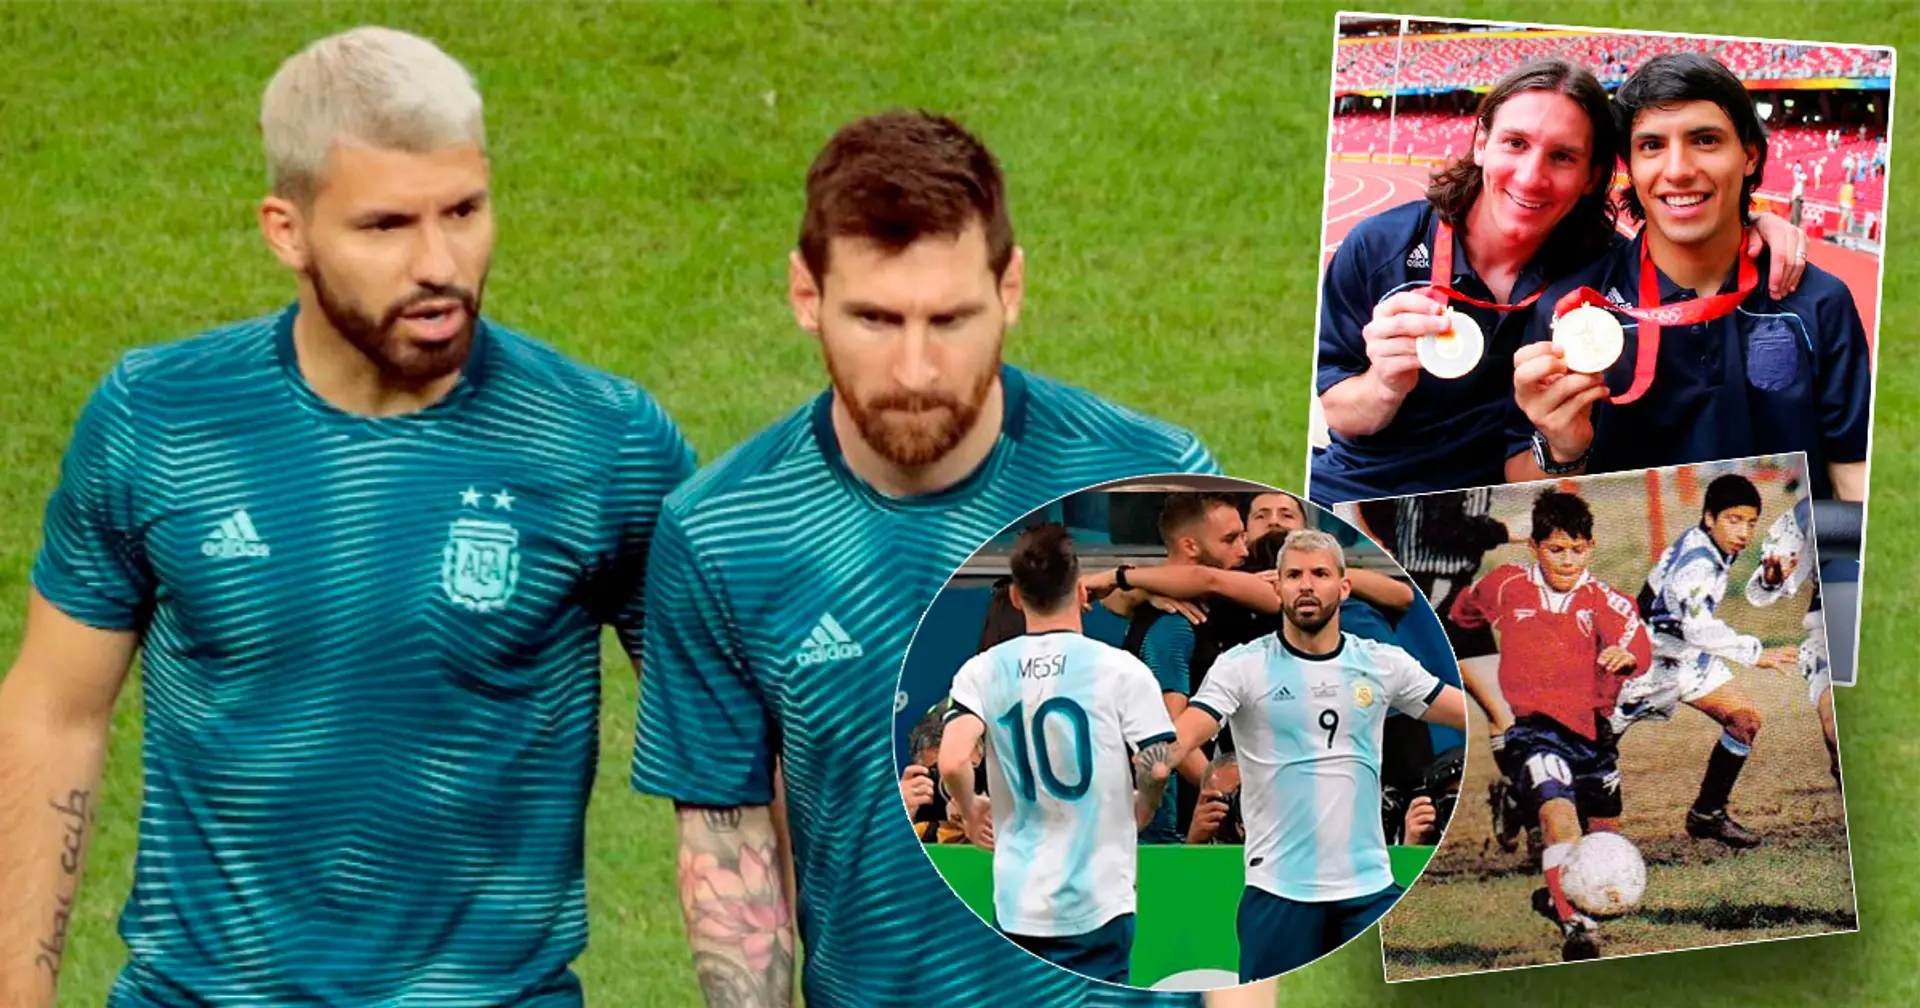 'The shock was intense': The tragedy that made Sergio Aguero and Leo Messi best friends for life